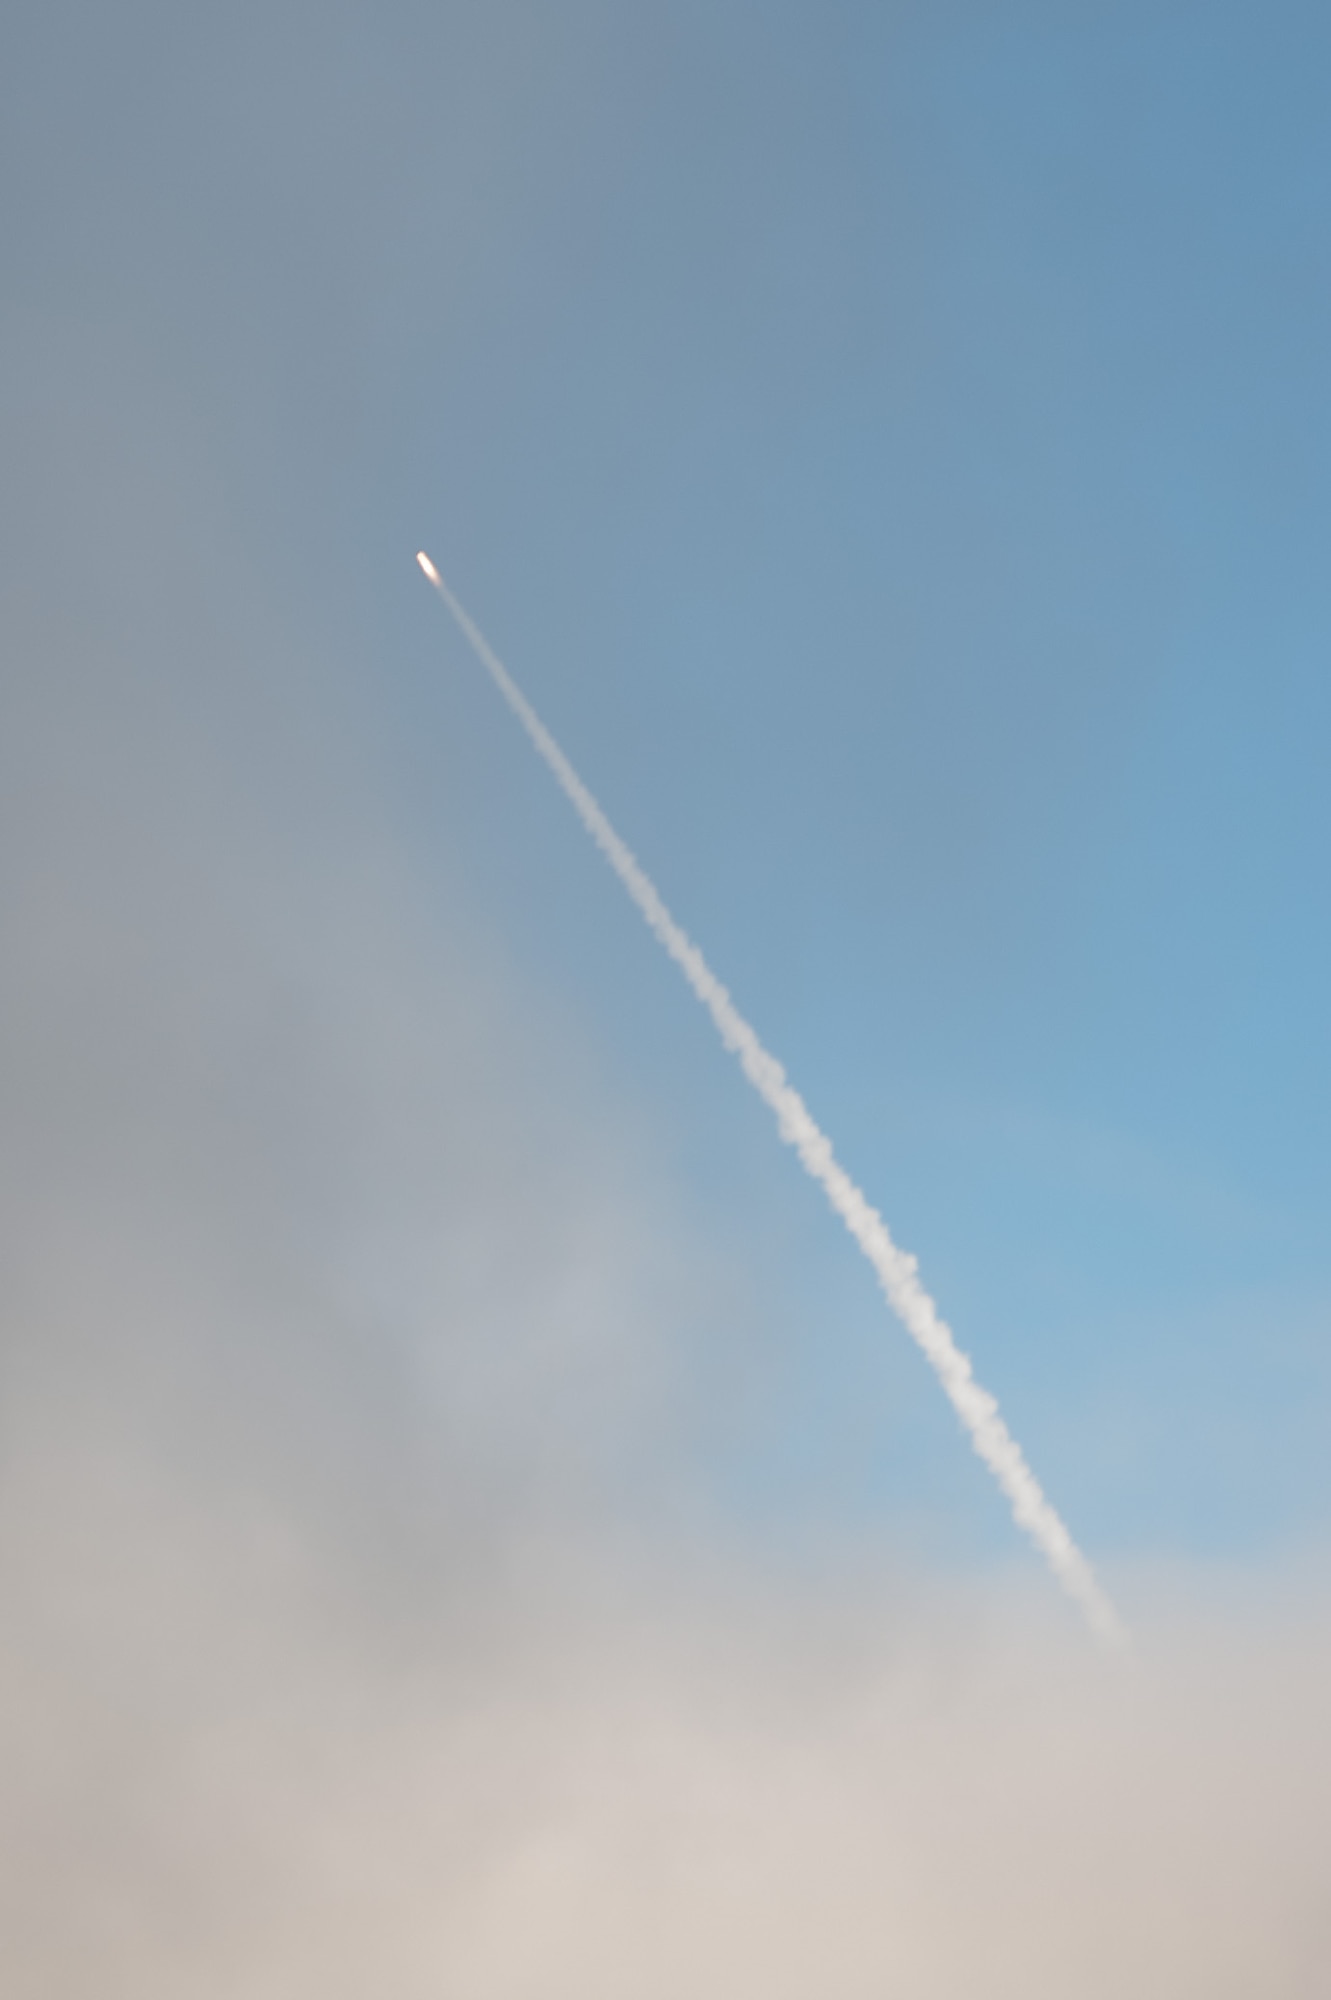 An unarmed Minuteman III intercontinental ballistic missile launches during an operational test at Vandenberg Air Force Base, Sep. 23, 2014, at 7:45 a.m. Col. Keith Balts, 30th Space Wing commander, was the launch decision authority. (U.S. Air Force Photo by Michael Peterson/Released)